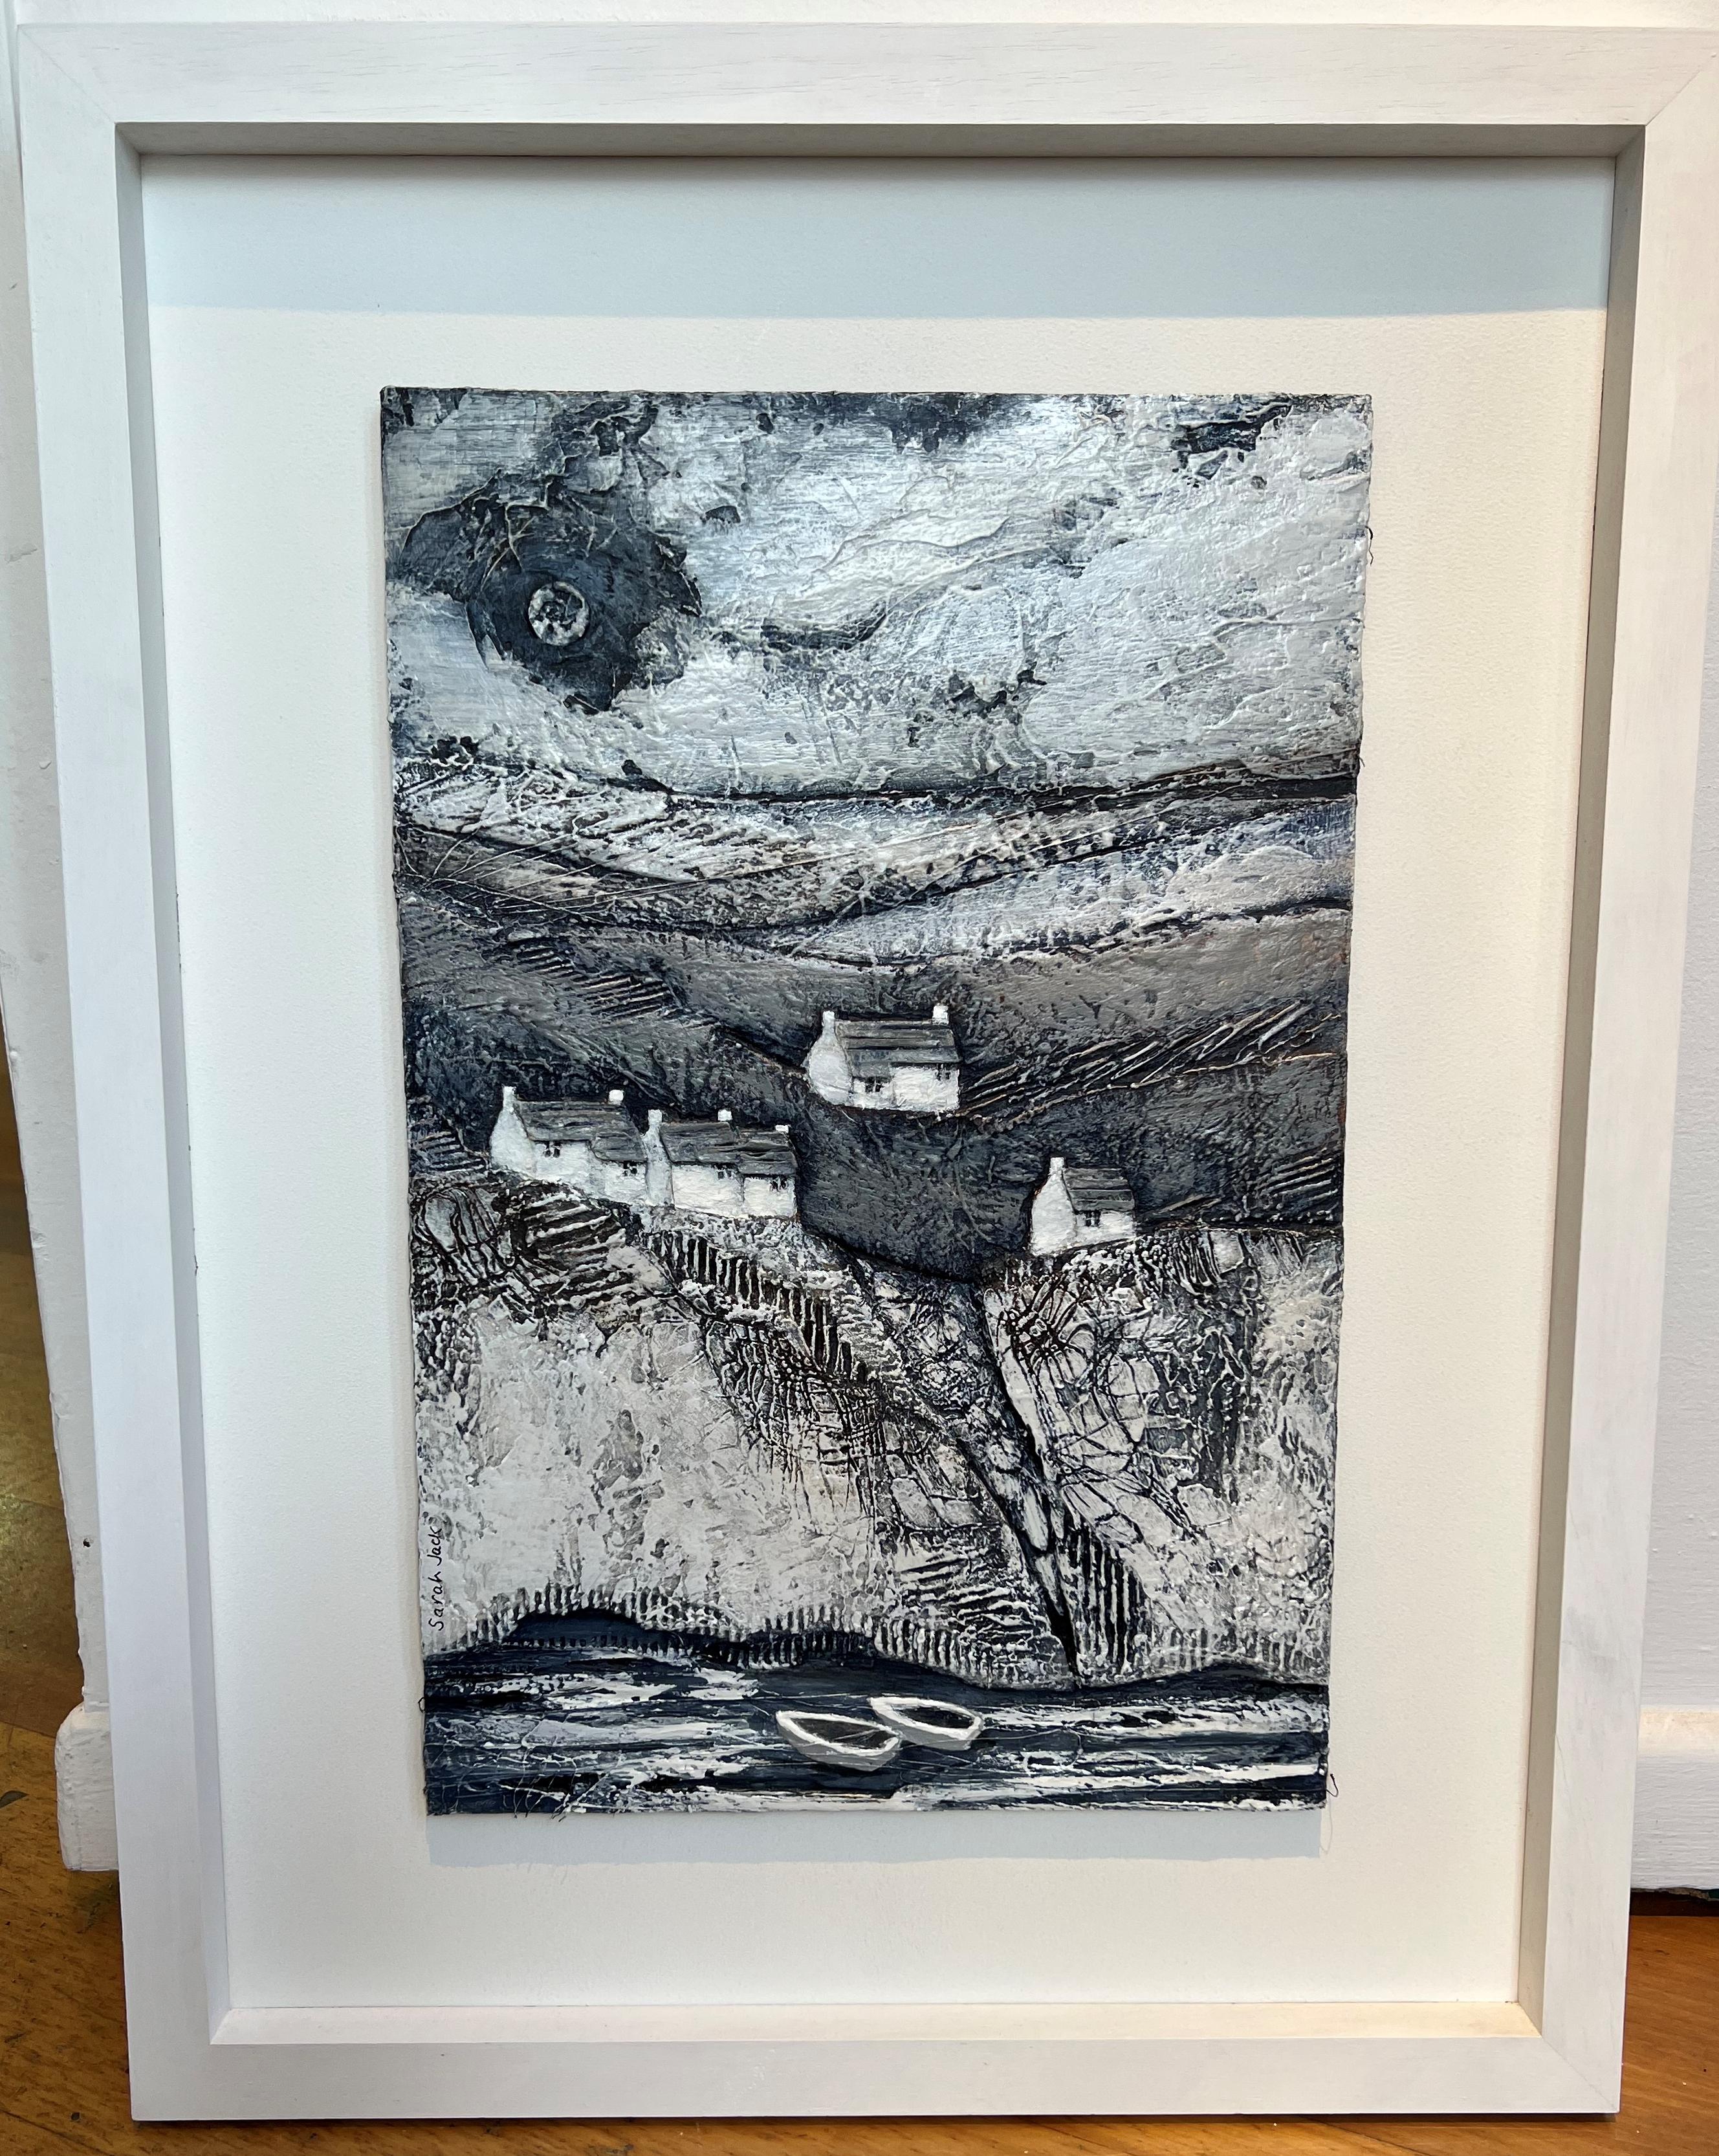 Down to the Sea - Brooding British Landscape / Framed Mixed Media - Contemporary Mixed Media Art by Sarah Jack